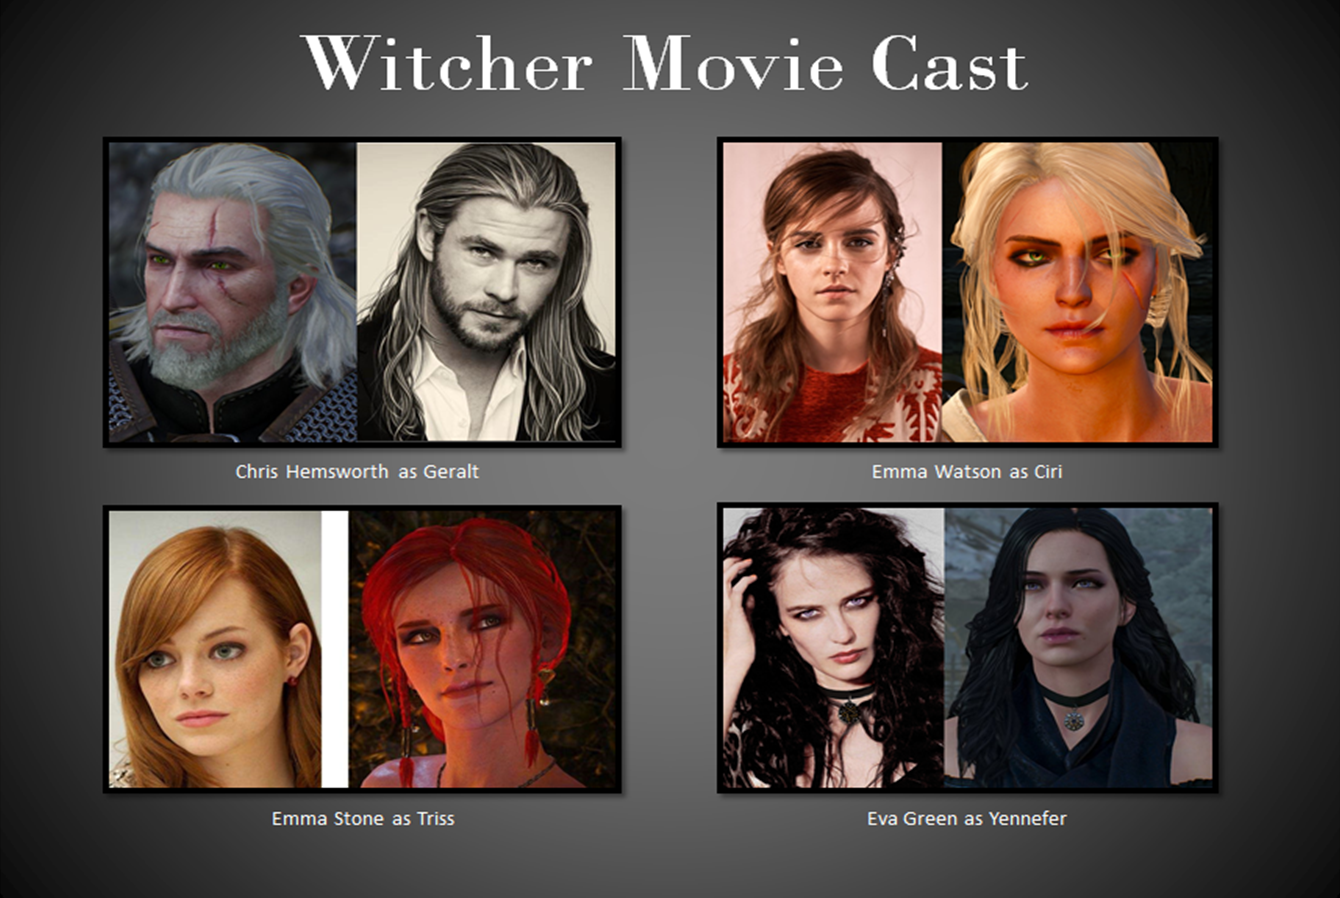 the switcher cast